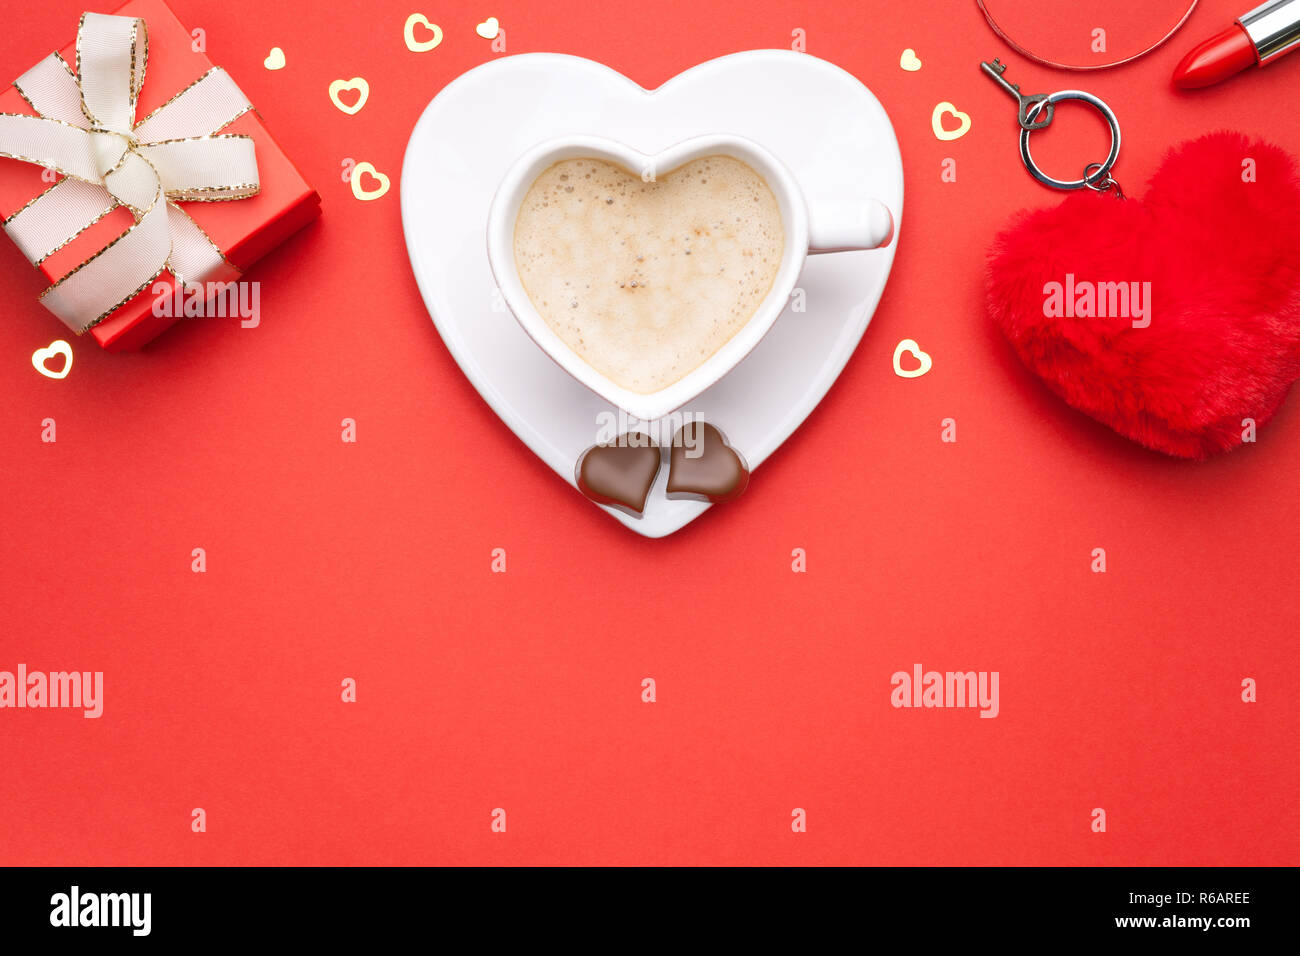 Valentines Day background Banque D'Images